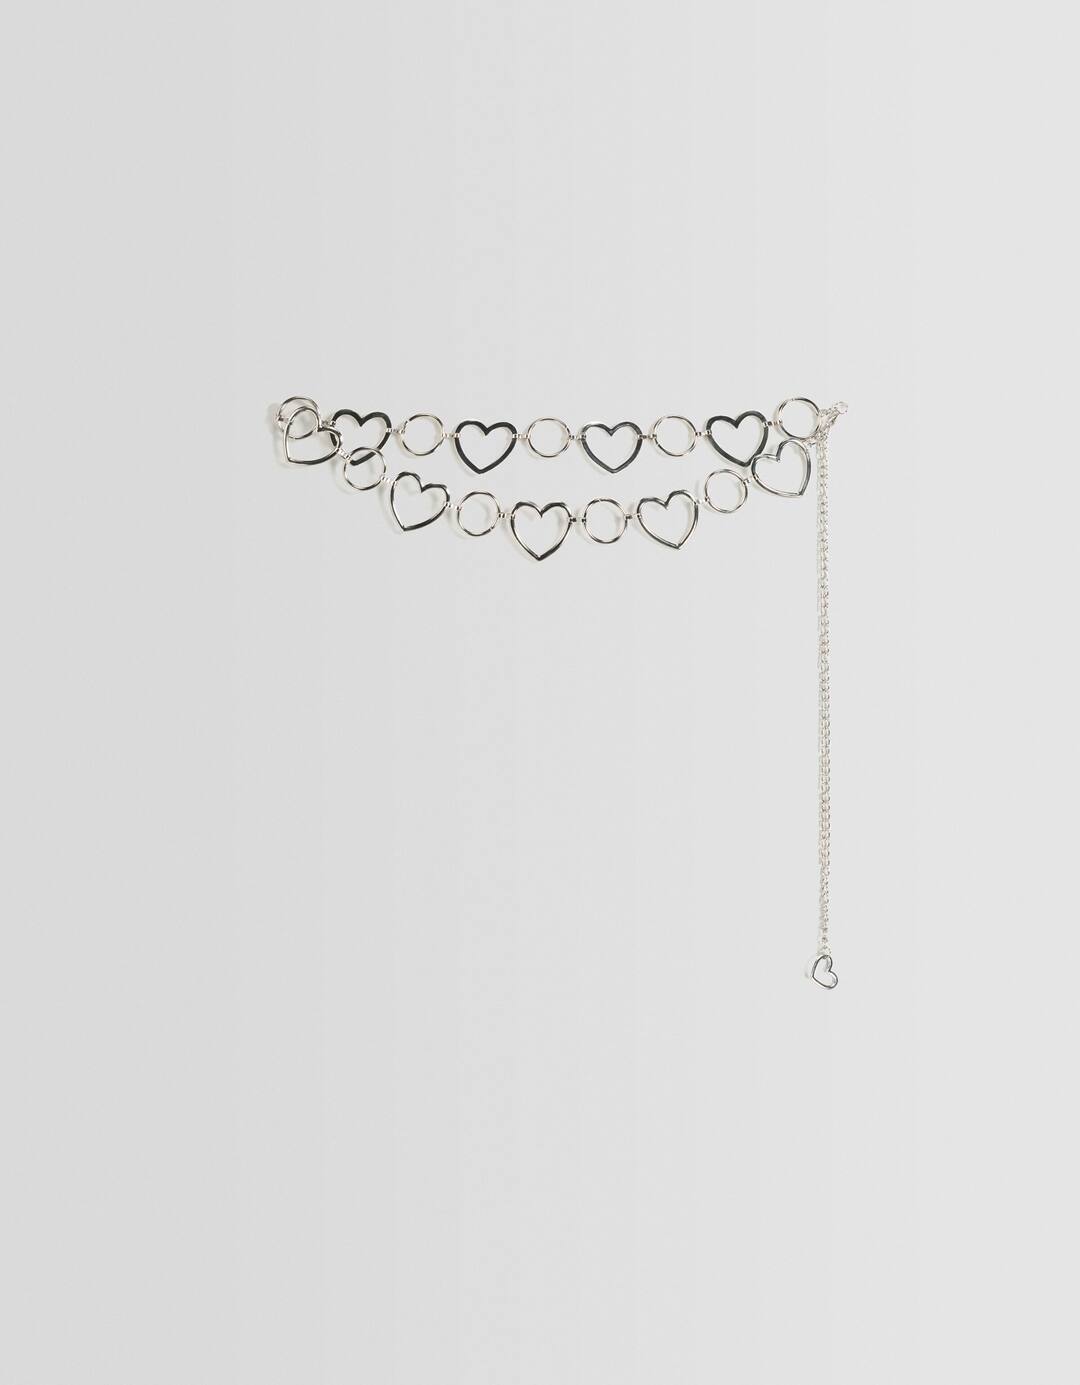 Heart chain belt with rings